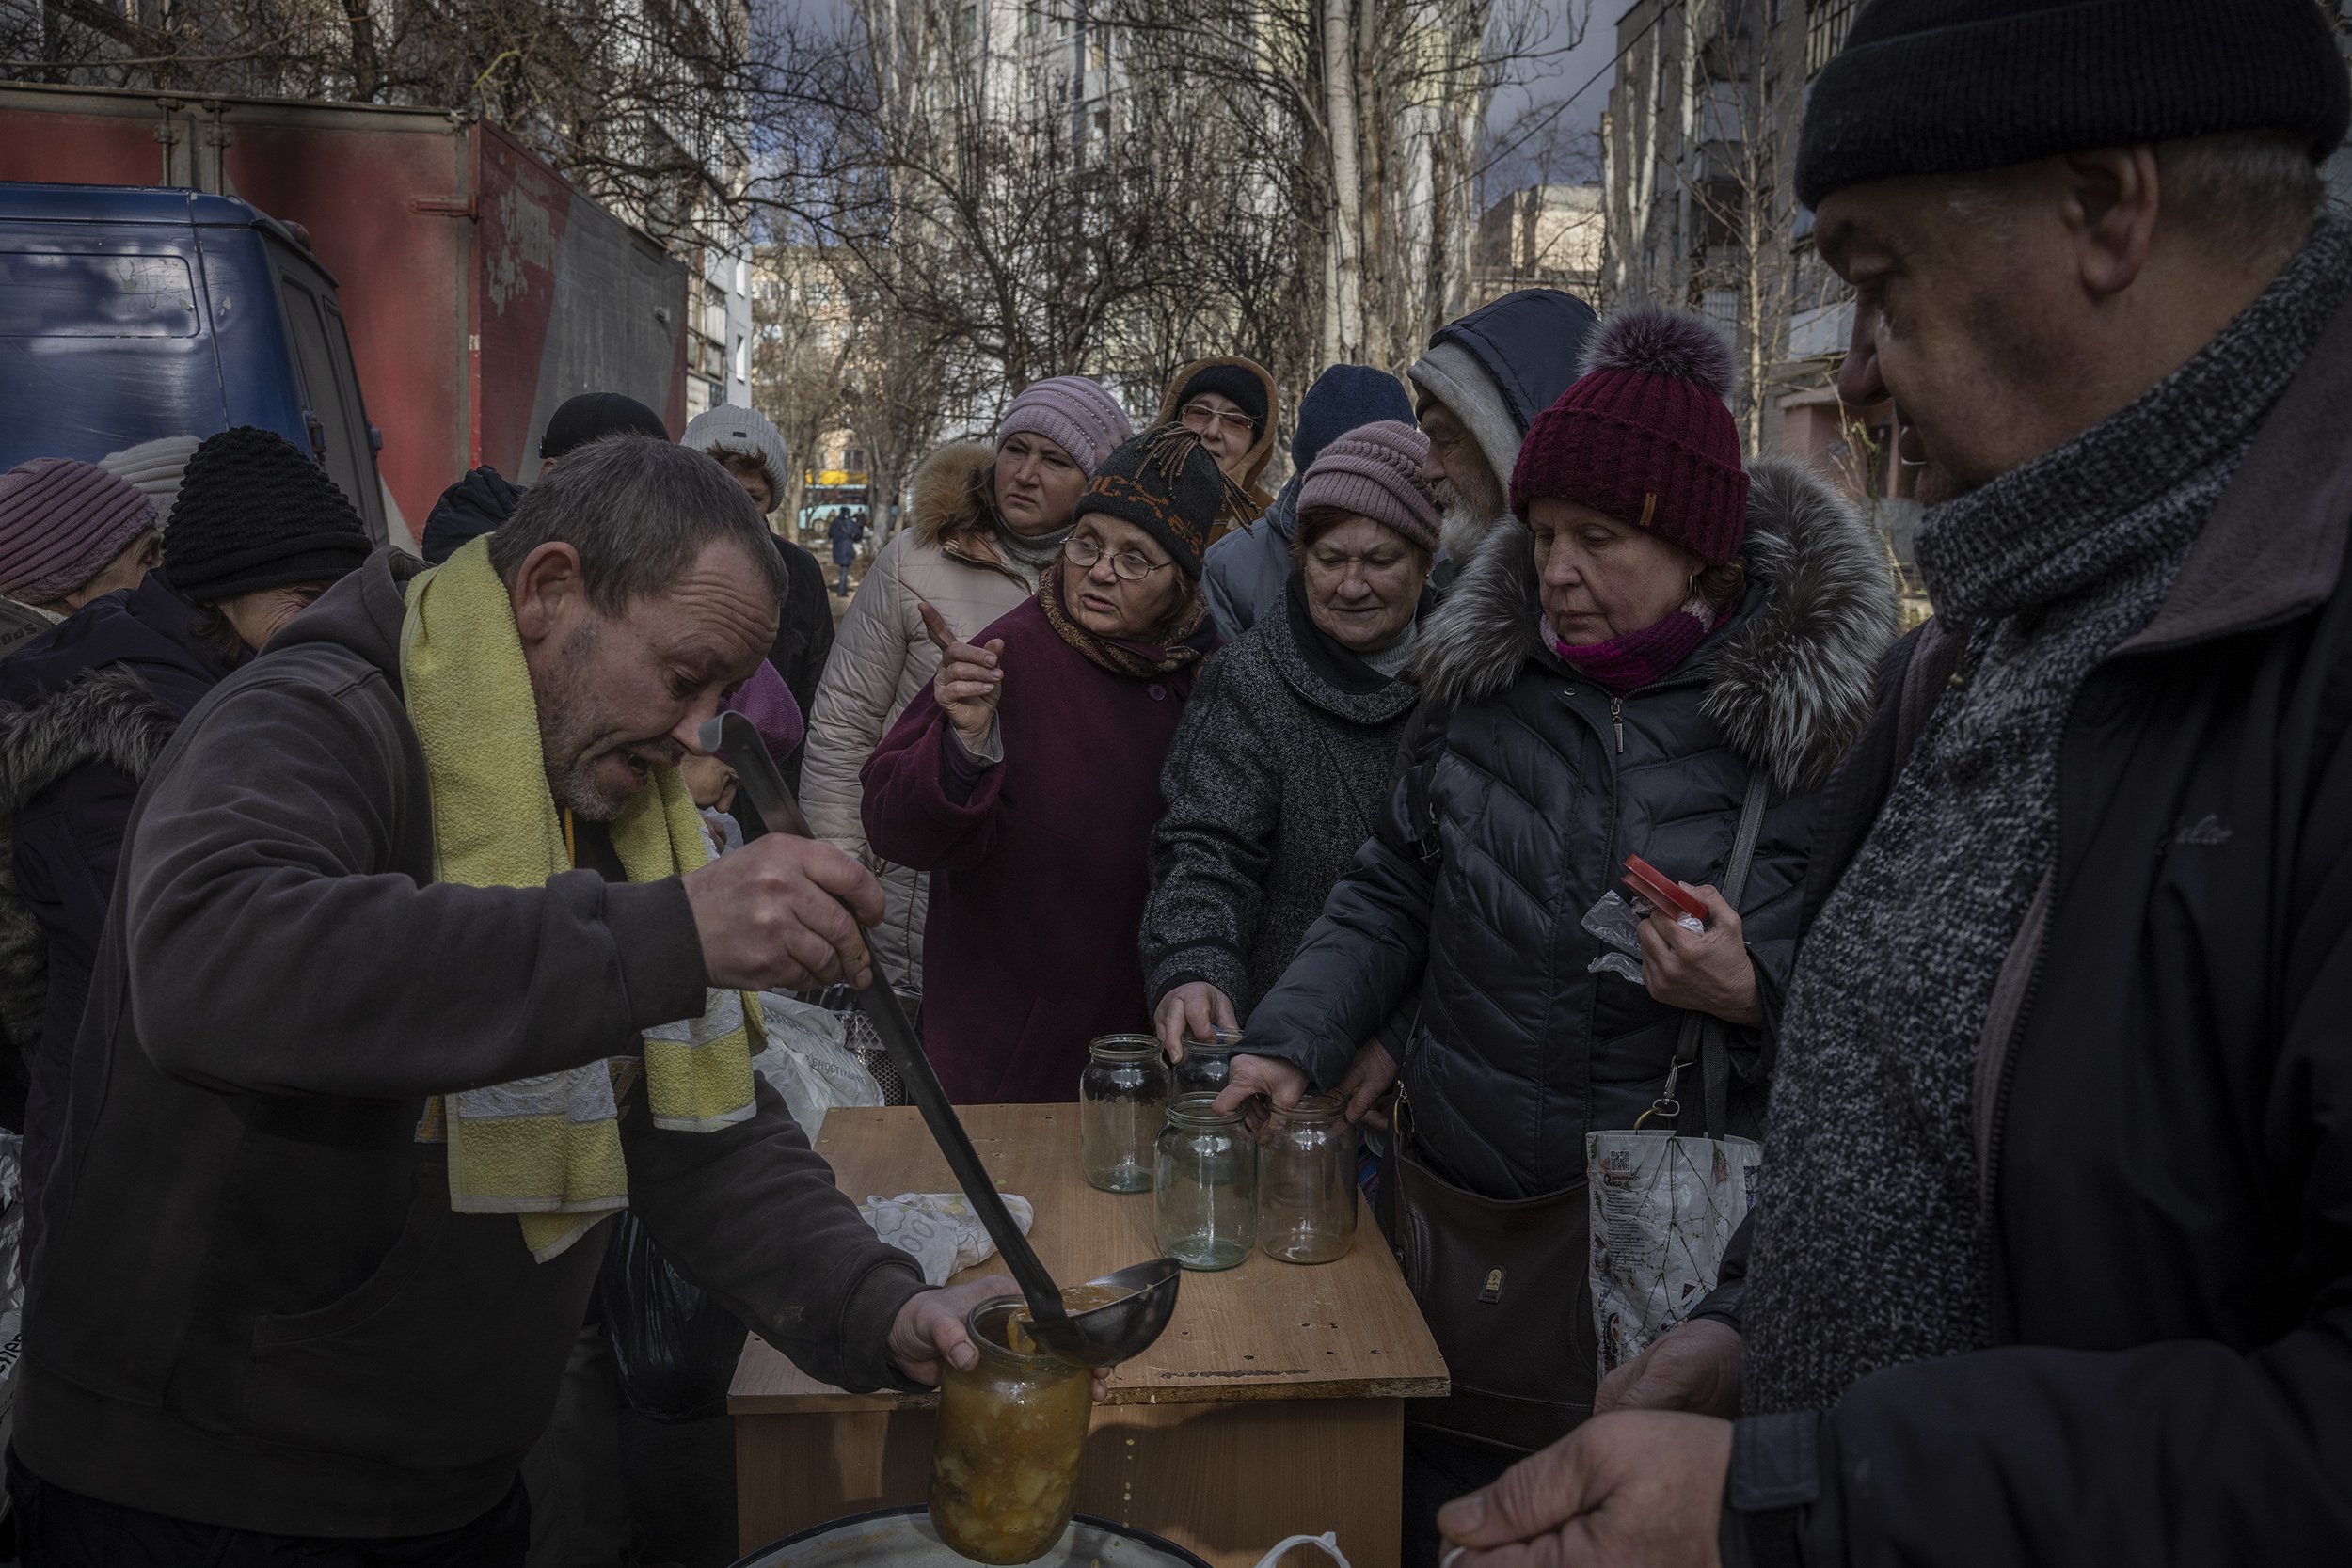  People who had remained in the liberated city of Kherson, lined up to receive hot soup at a handout organised by Volunteers. Although liberated in mid November 2022, the situation in Kherson deteriorated as Russian forces began to shell the city reg